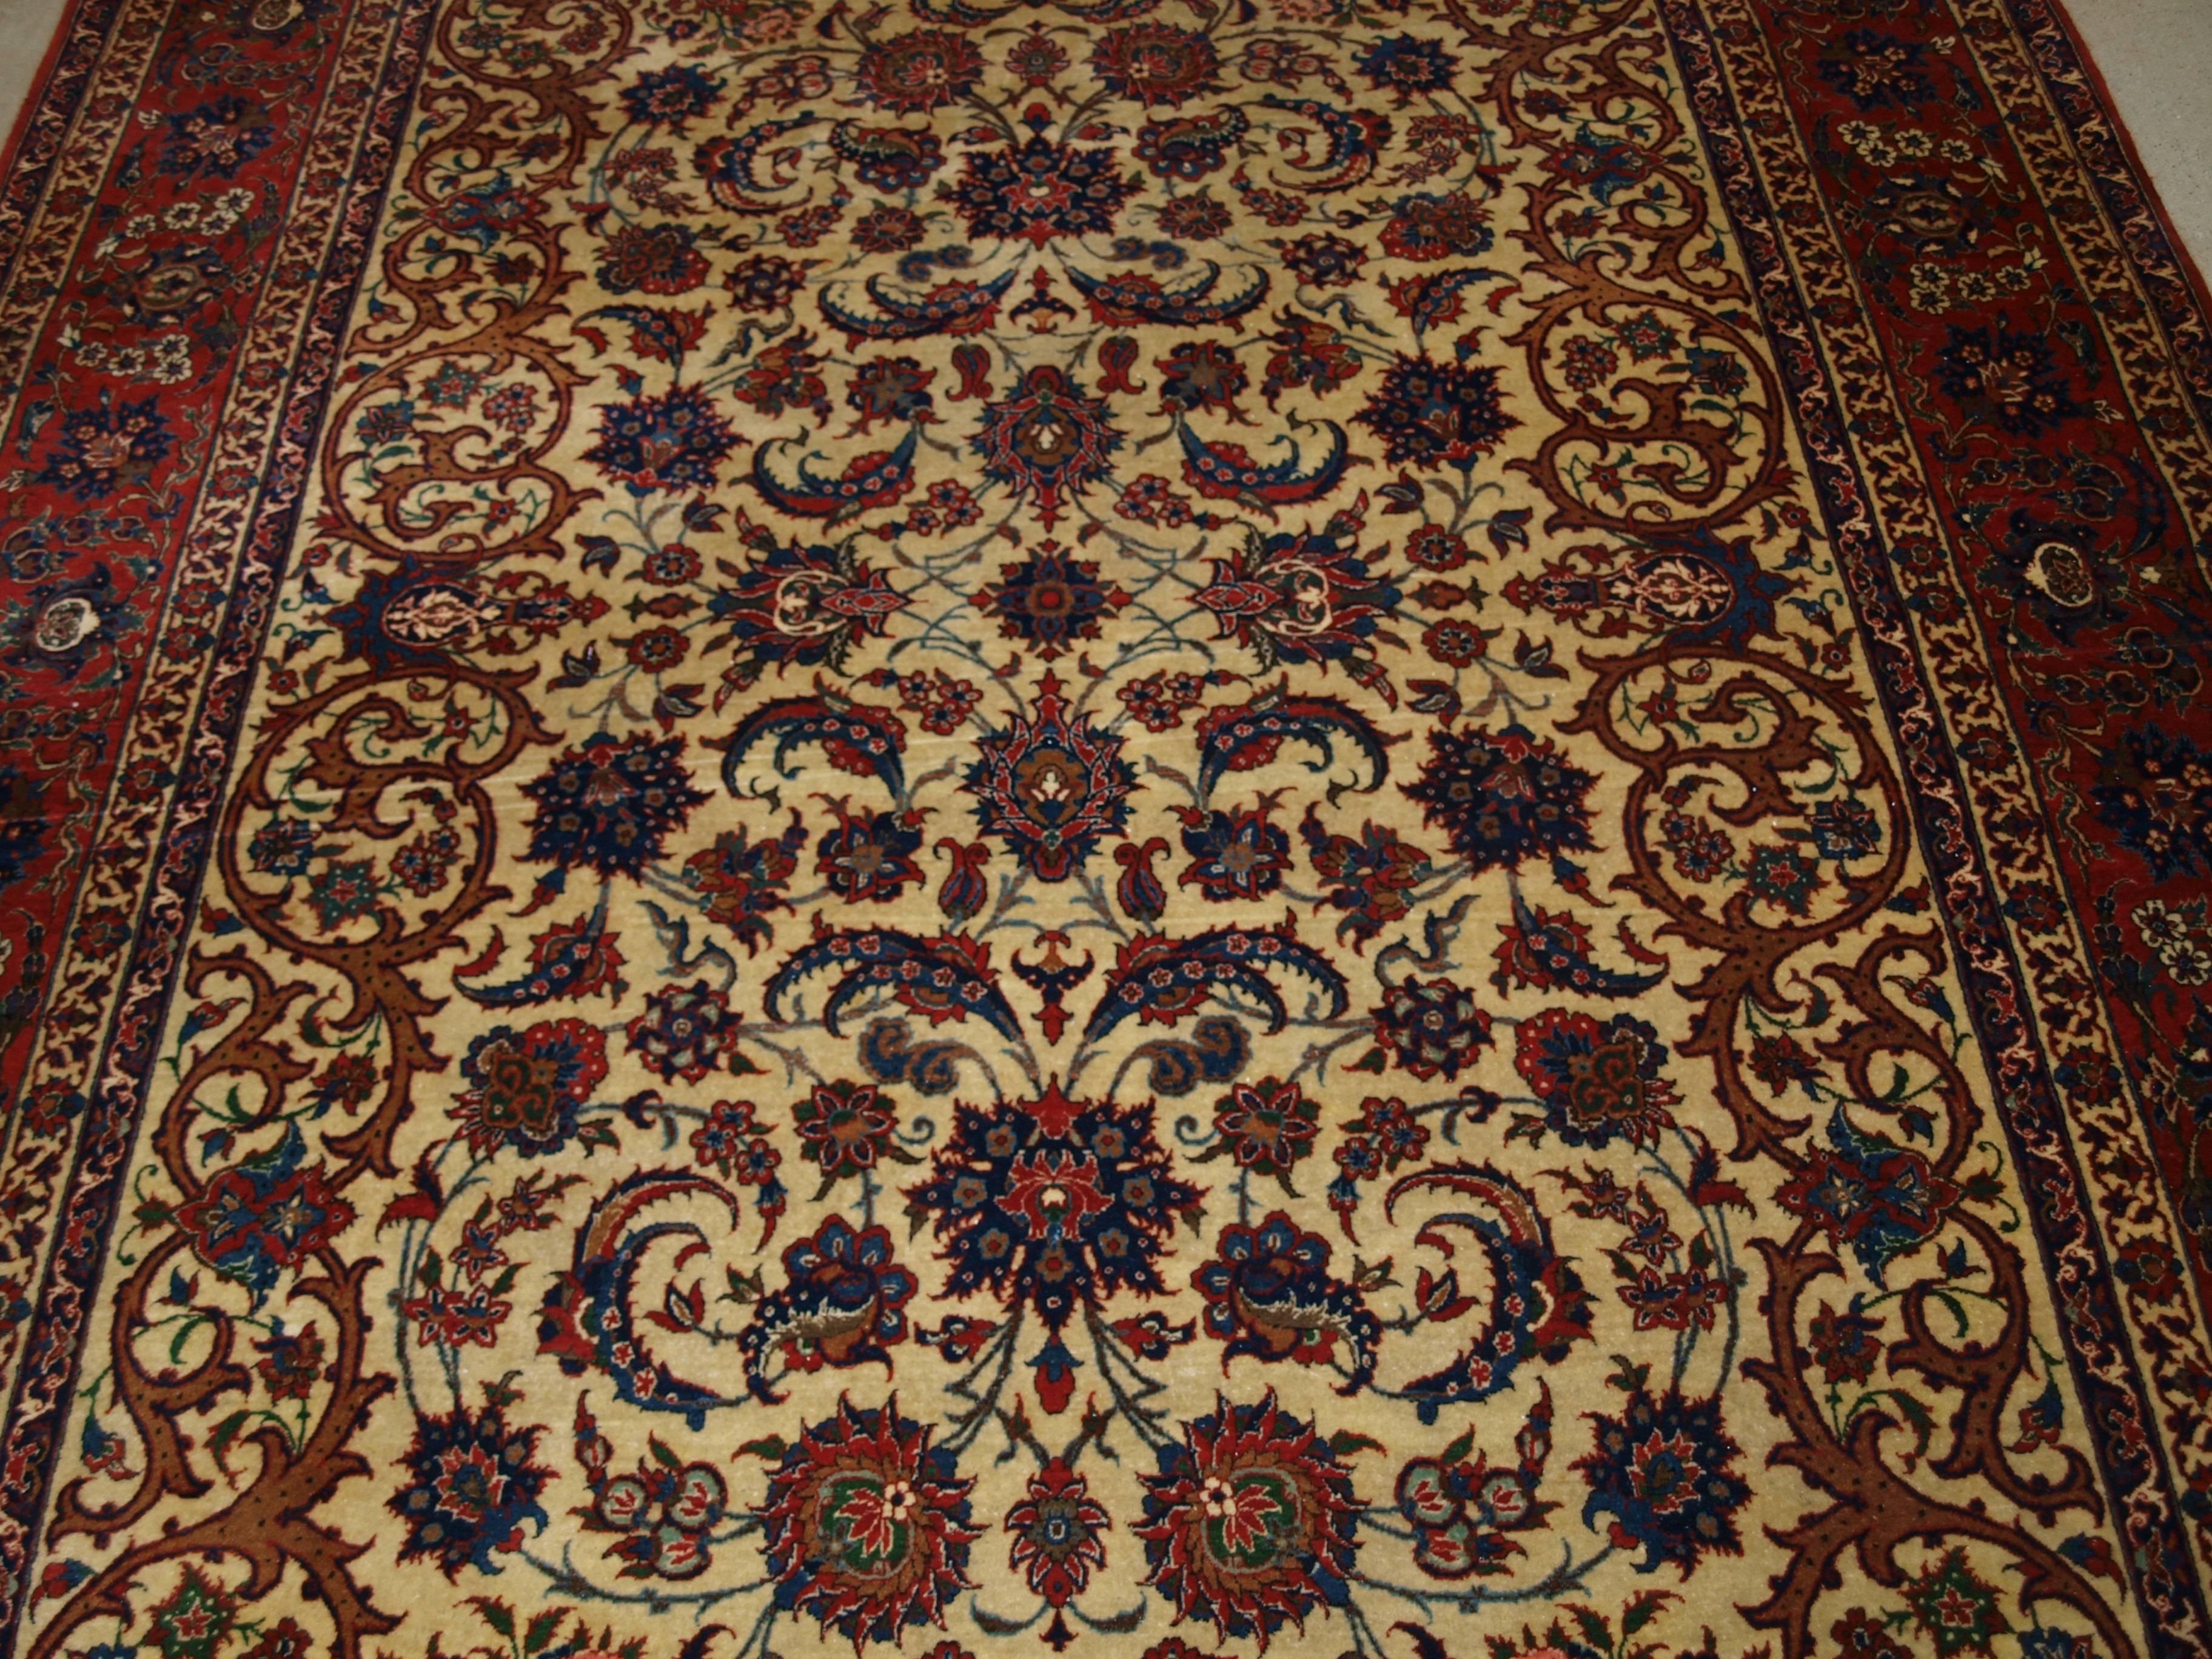 Old Persian Isfahan Carpet, of Superb Classic Design, Outstanding Color For Sale 4